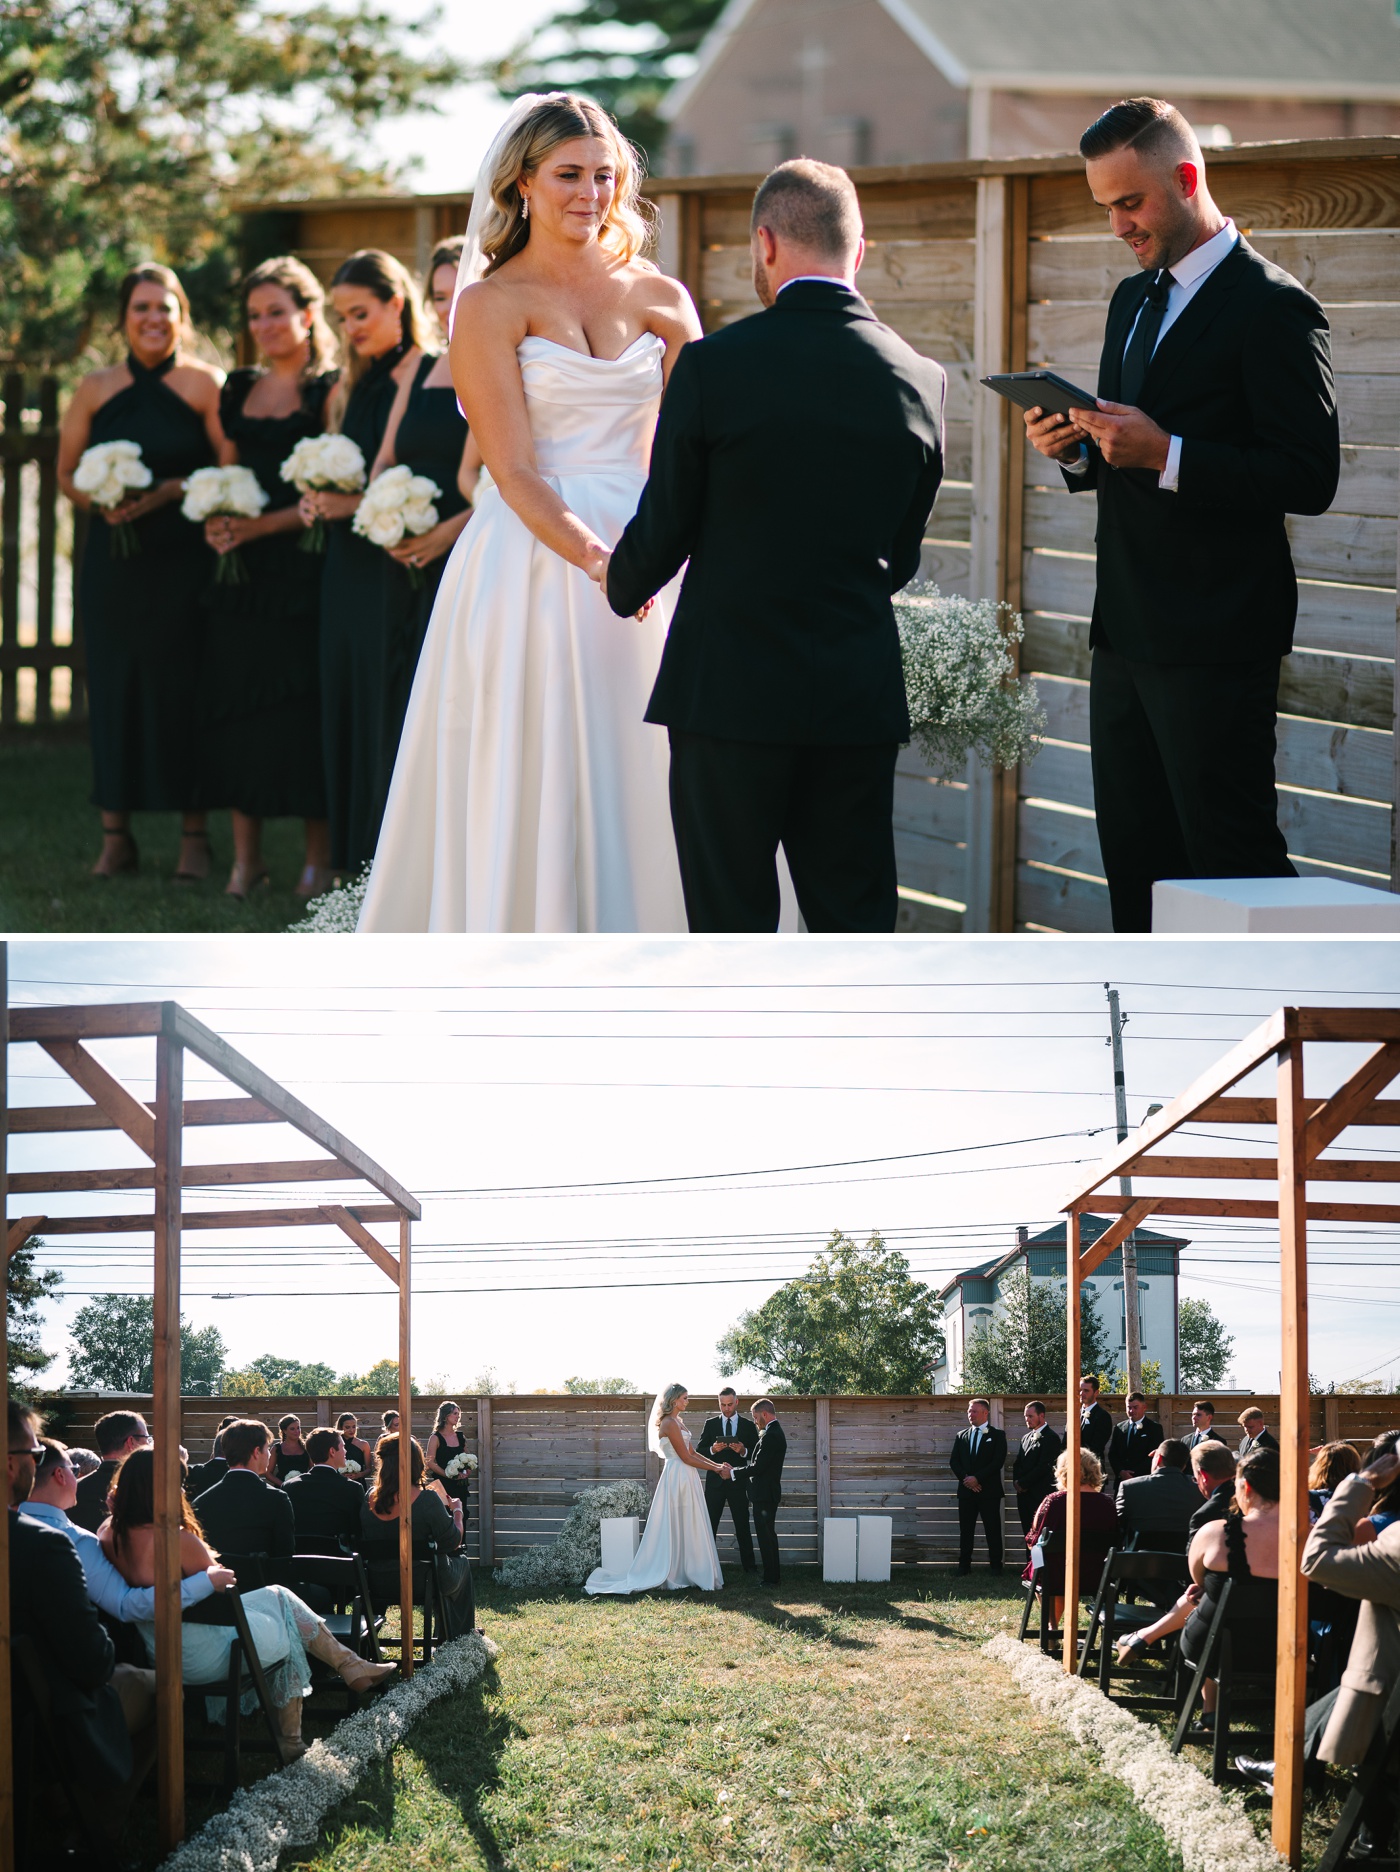 Outdoor wedding ceremony at Ivory Foundry